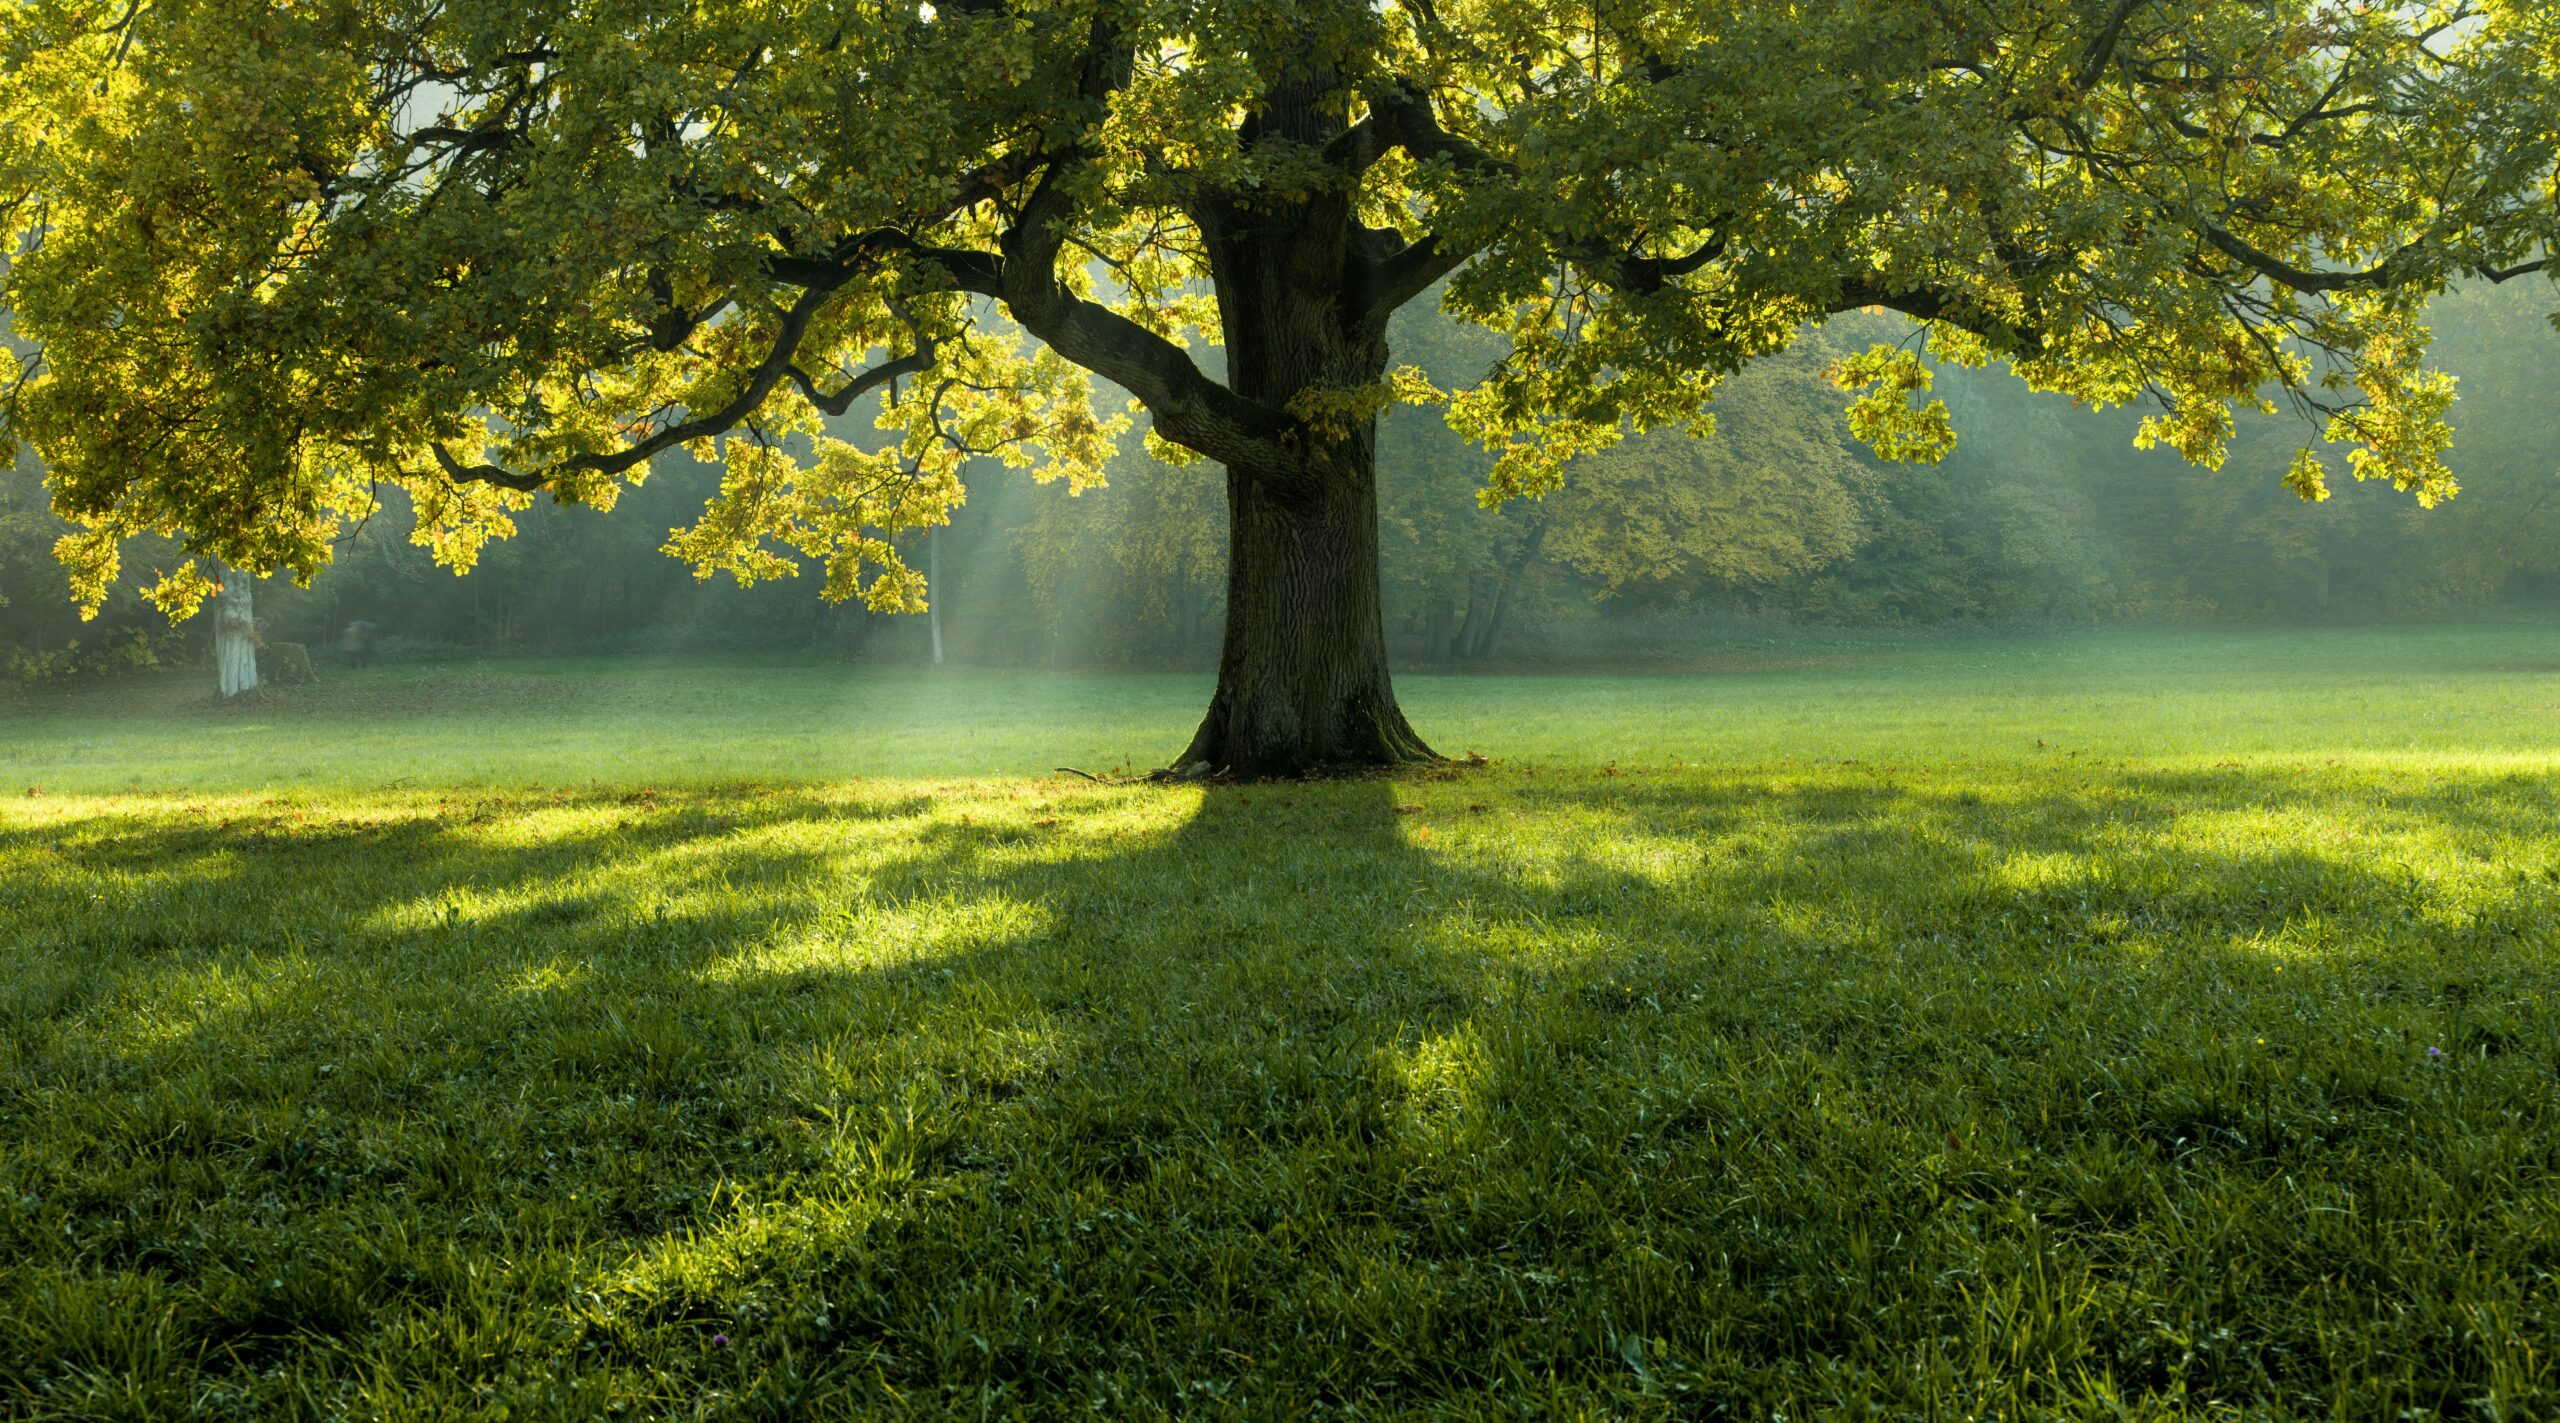 A beautiful tree in the middle of a field covered with grass with the tree line in the background